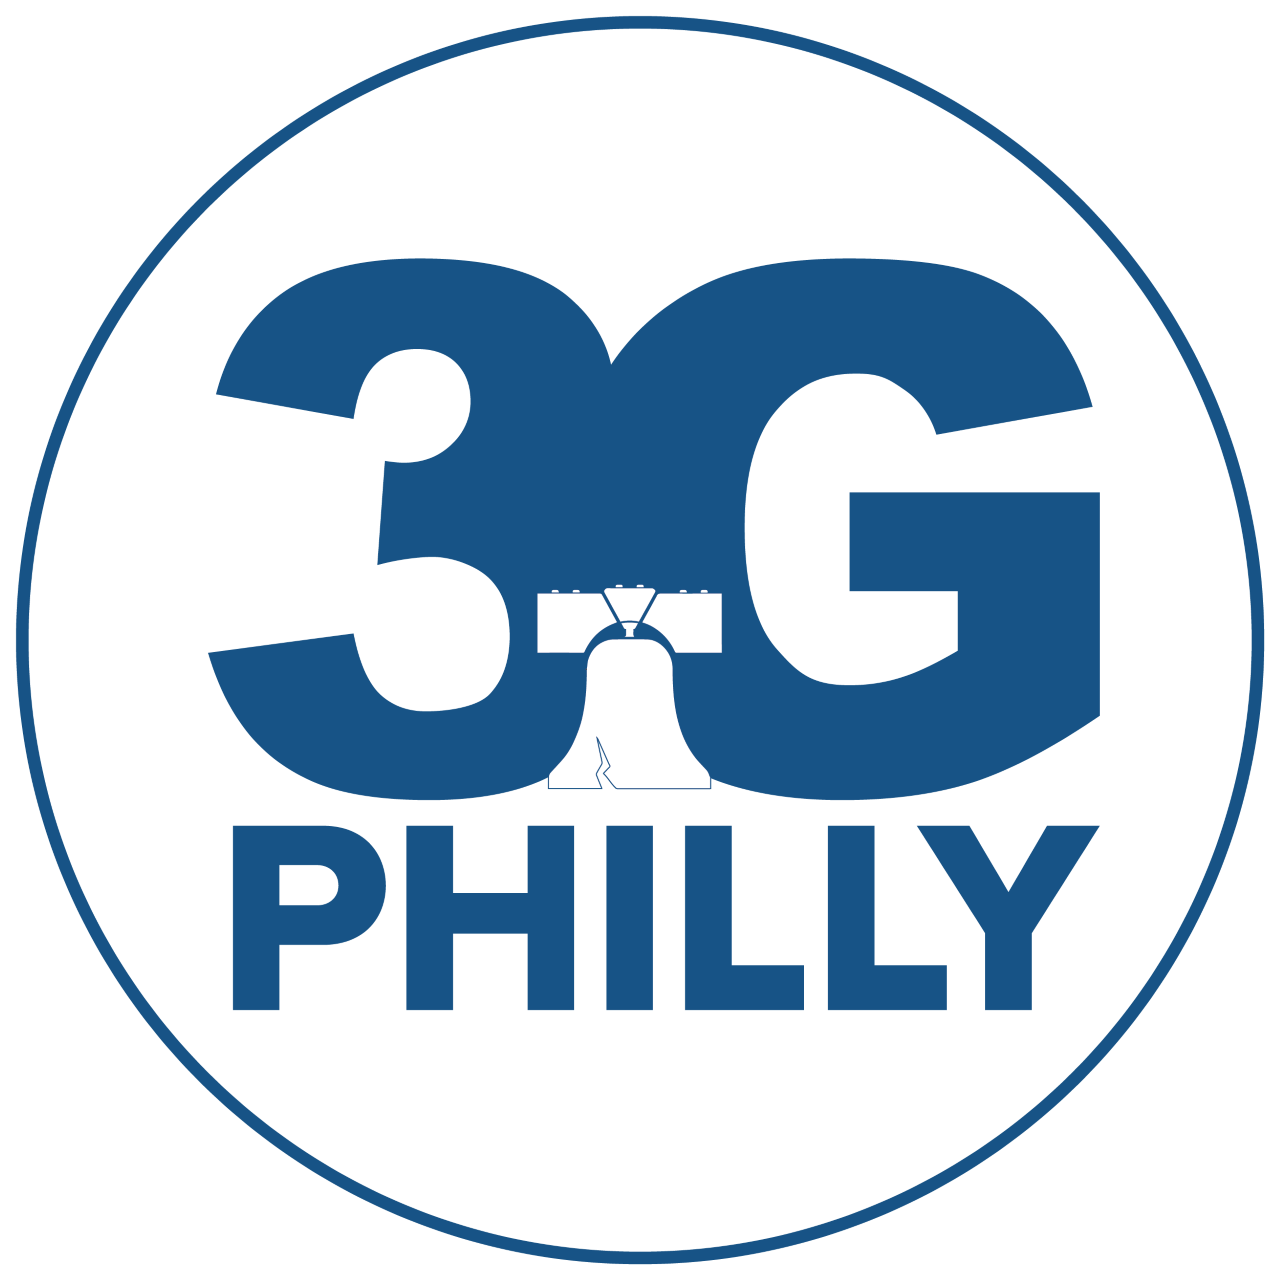 3GPhilly